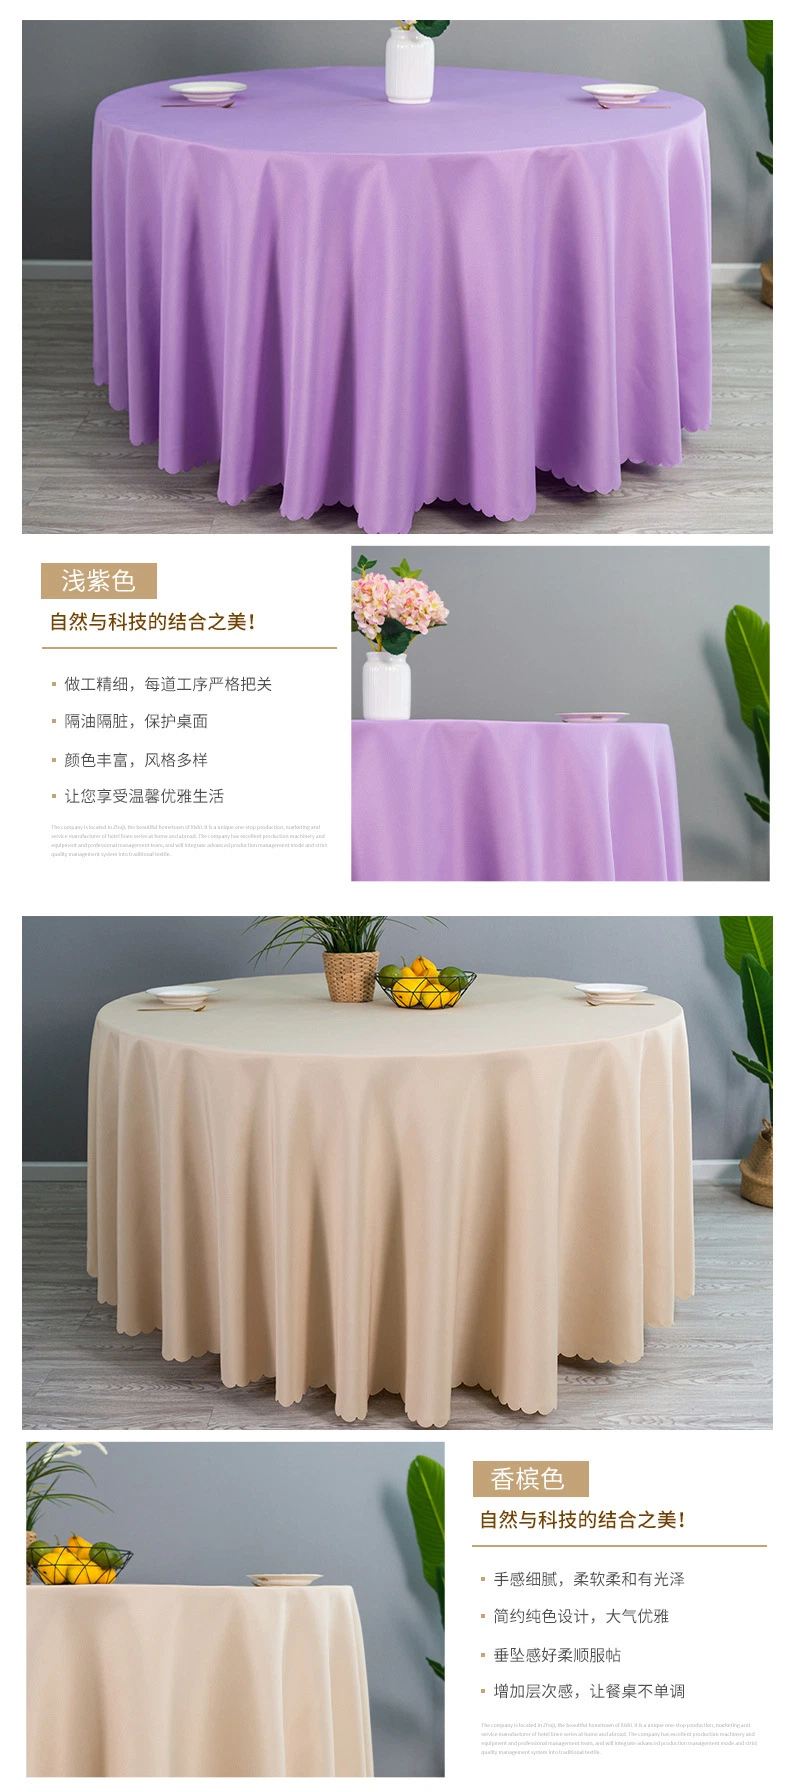 China Quality Luxury Banquet Hotel Polyester Fabric Tablecloth Chair Covers